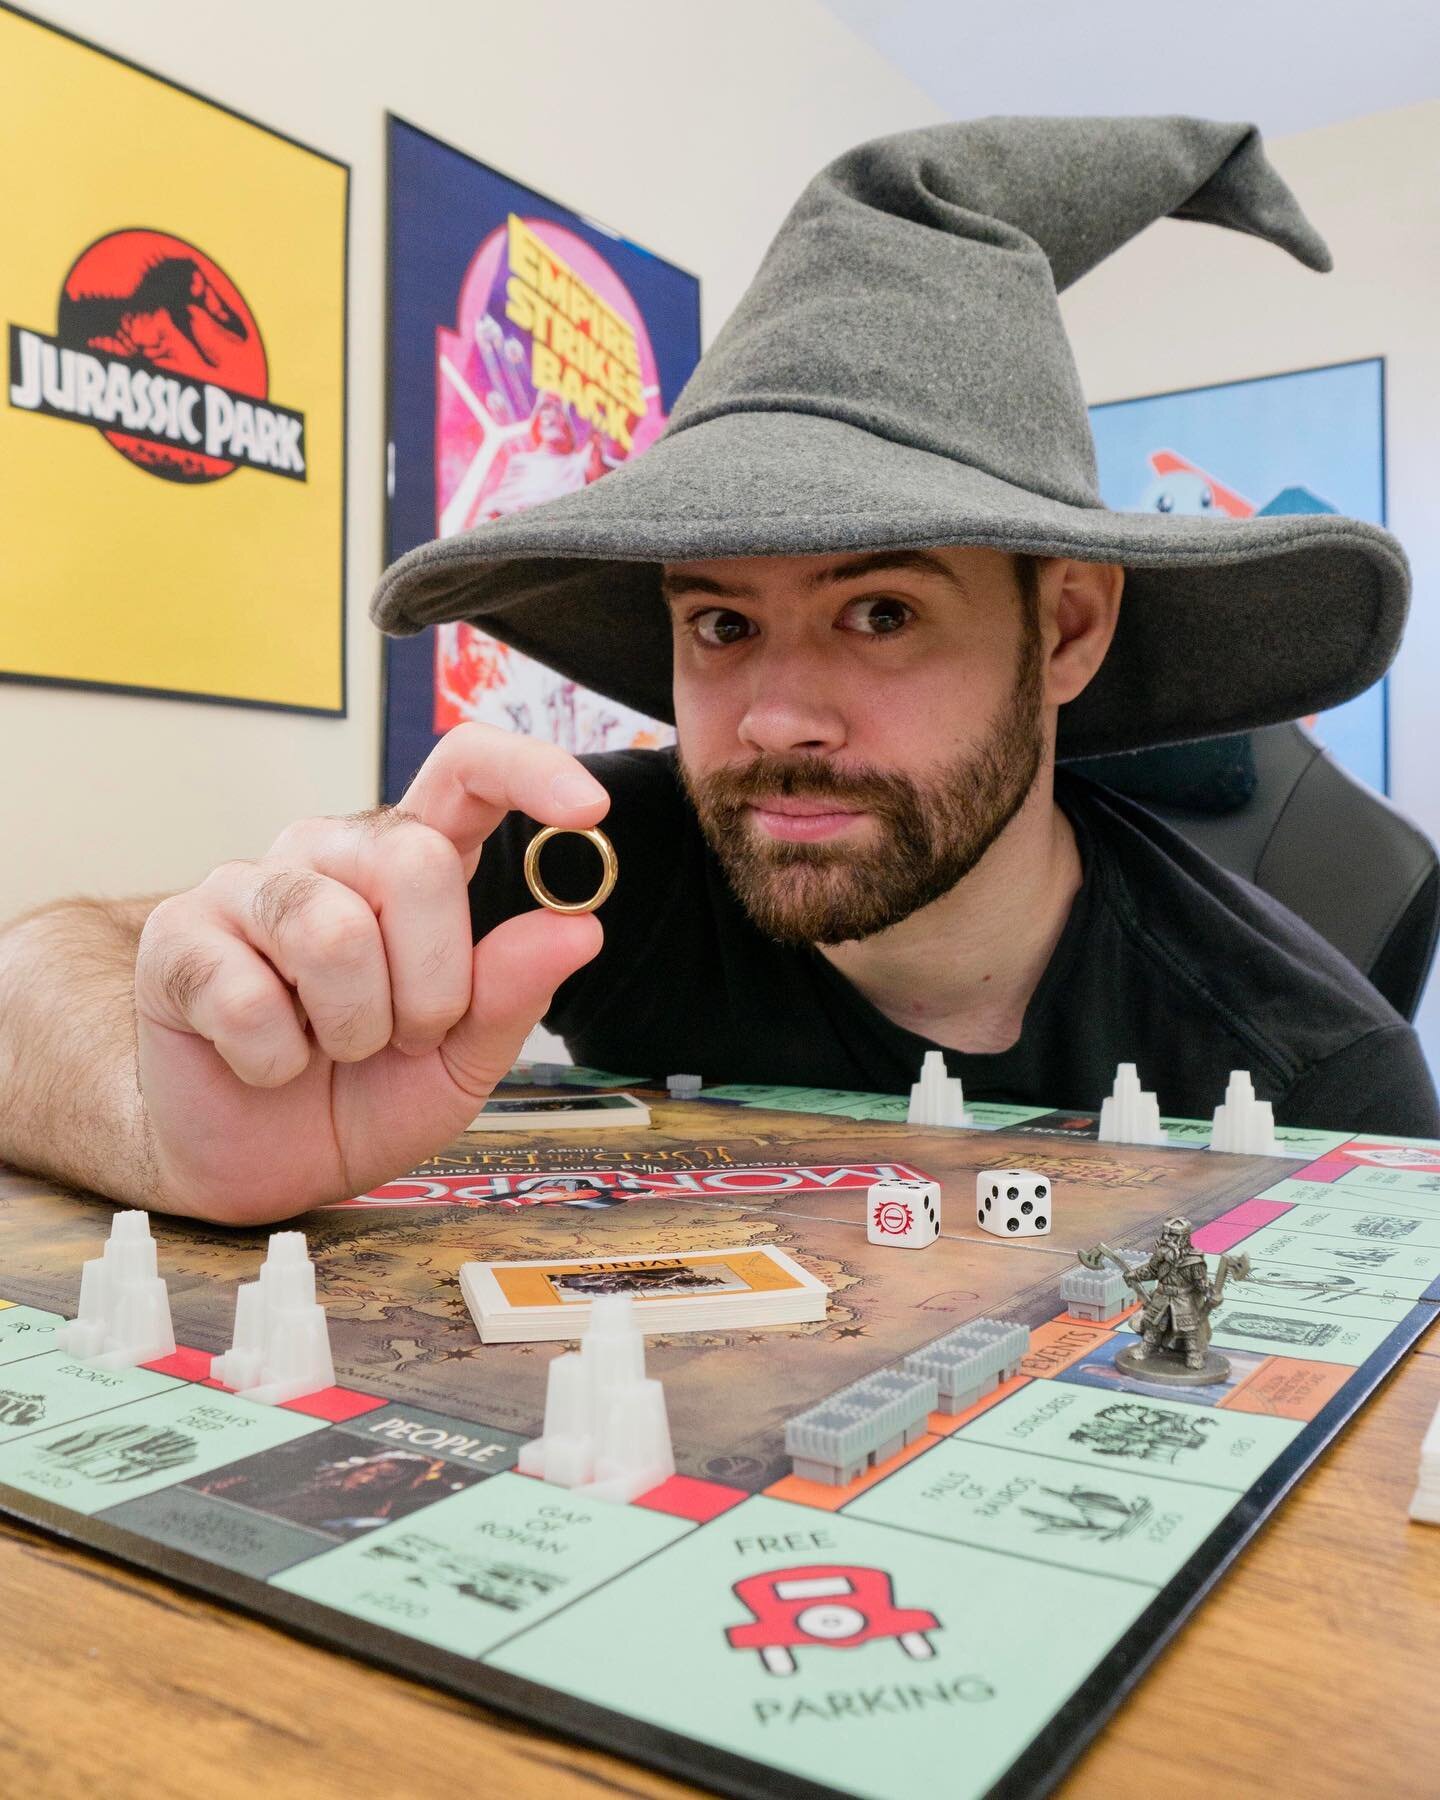 The One Ring is taken hold of me... I've actually been streaming Lord of the Rings Monopoly most Fridays on twitch, so feel free to come hang out! Who's your favorite LOTR character?
#twitch #boardgames #LordOfTheRings #lotr #tolkien #monopoly #ganda